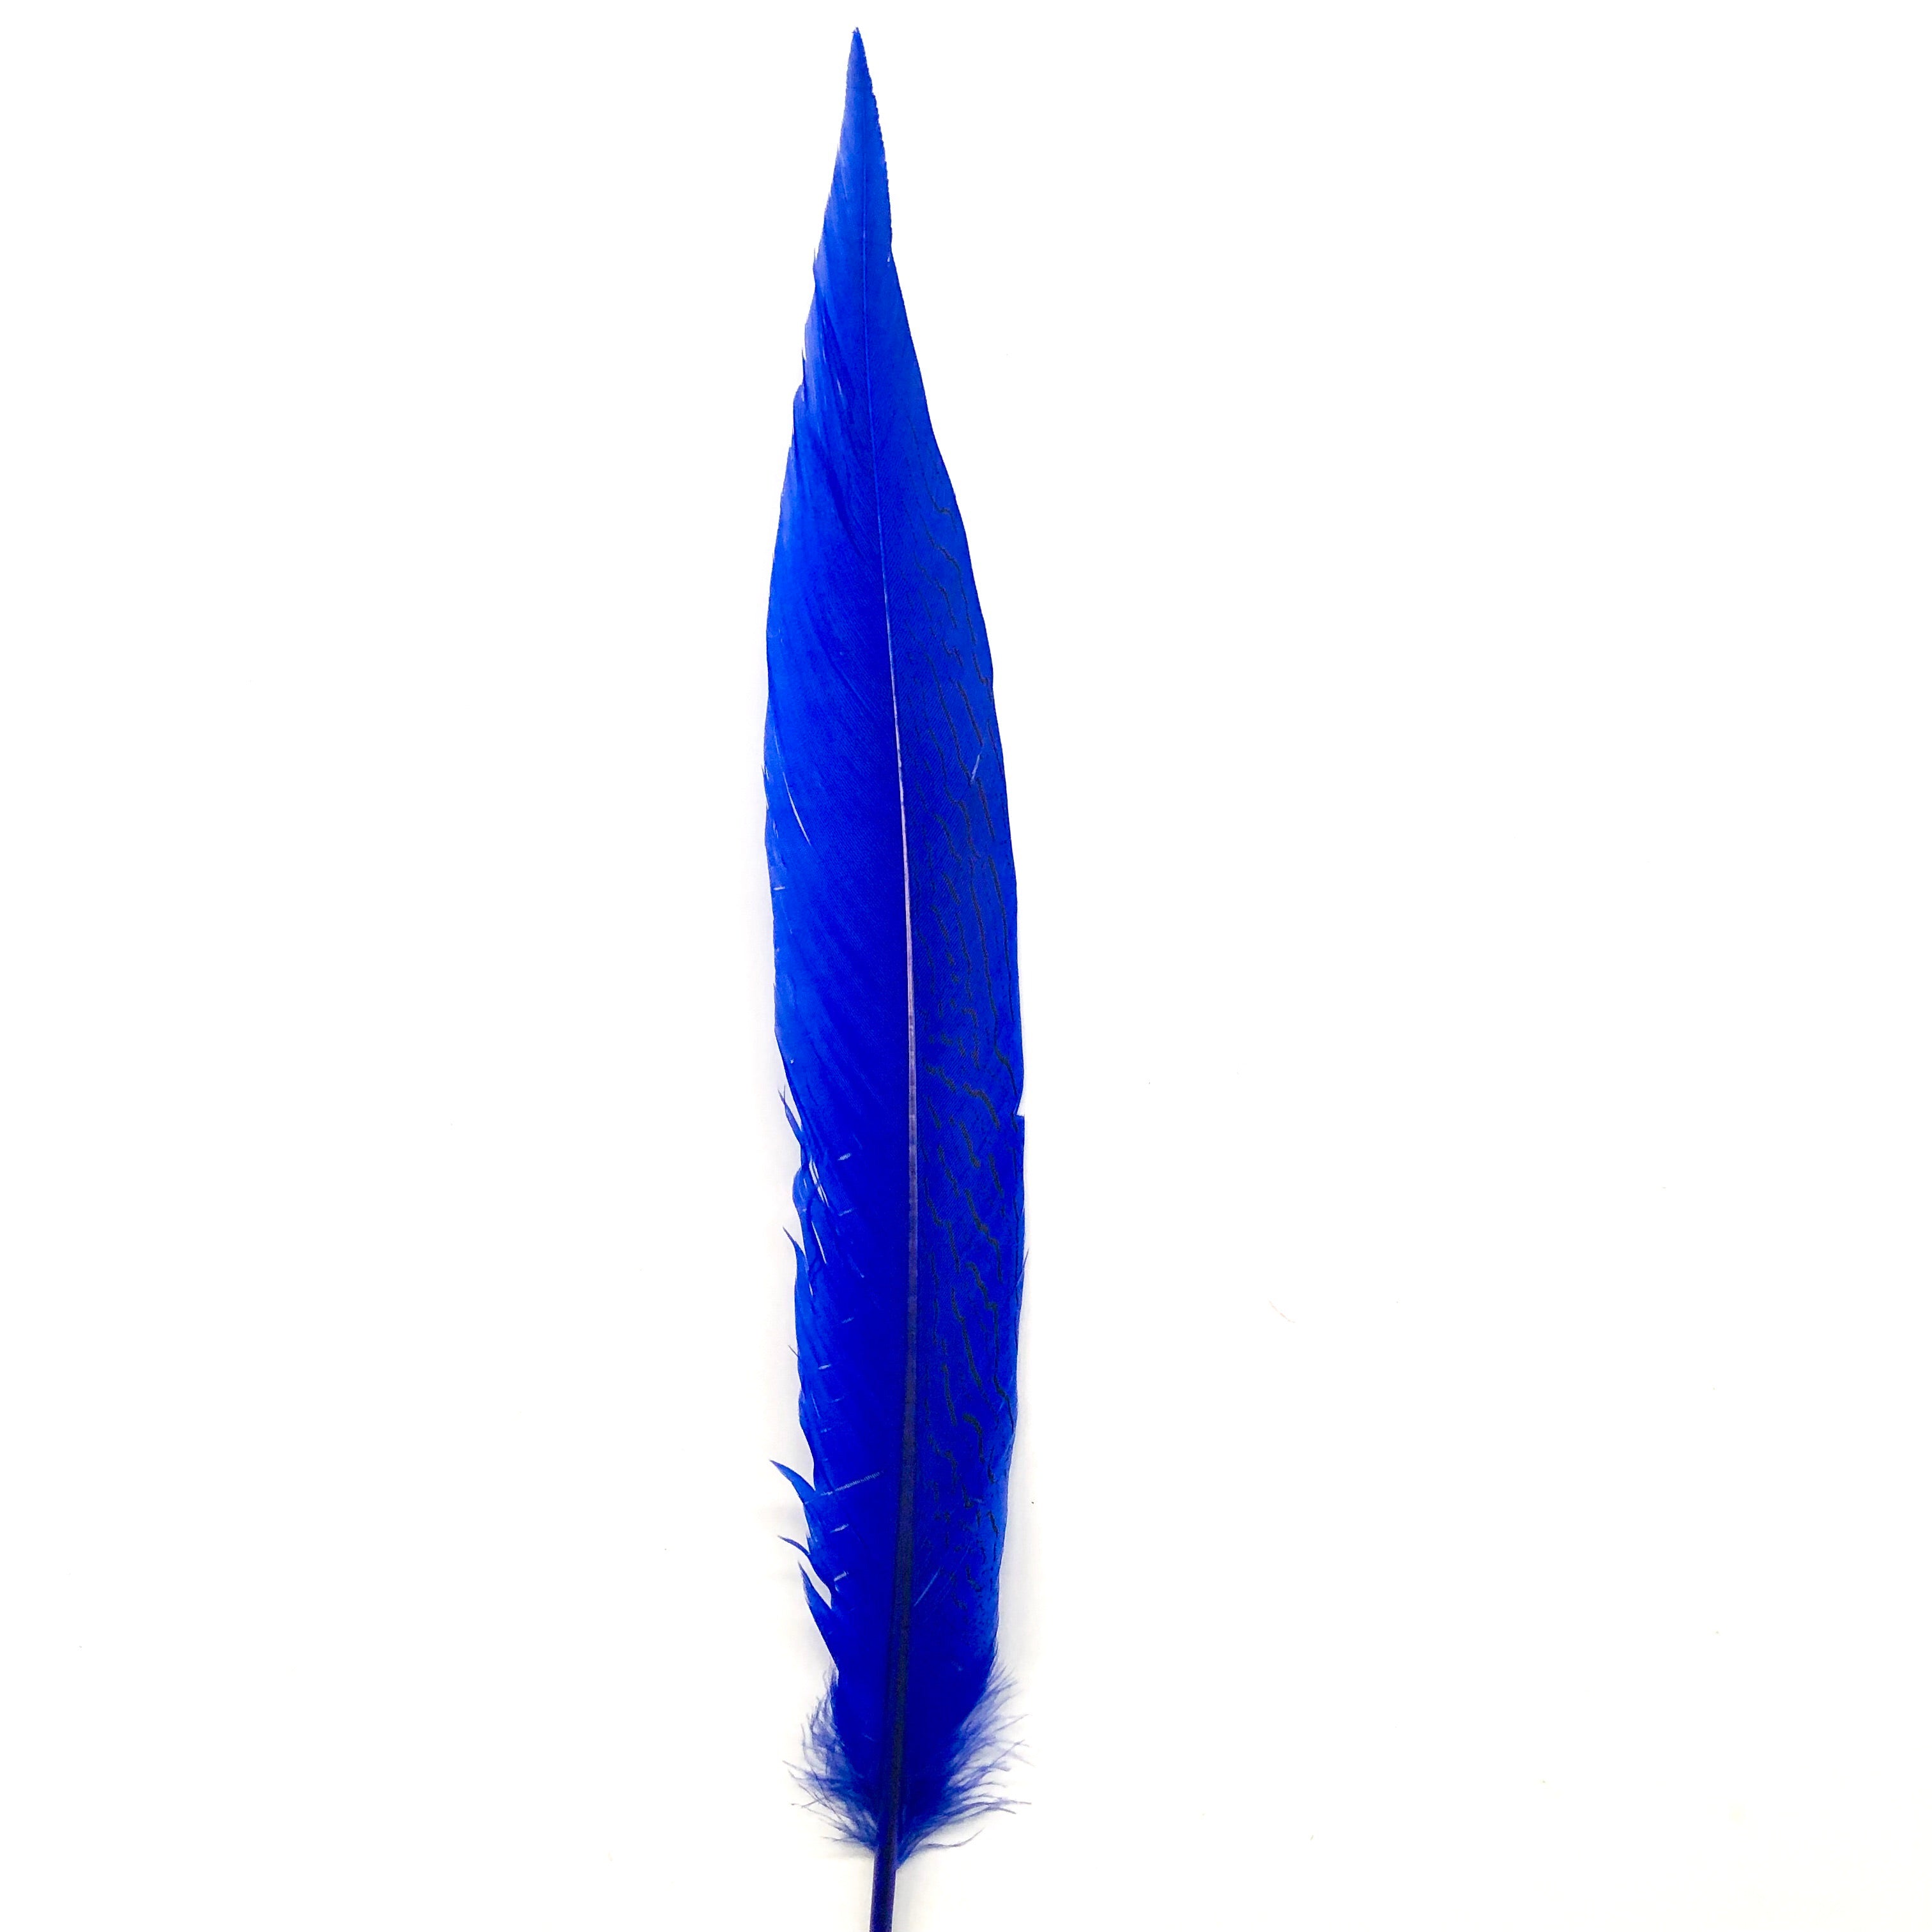 6" to 10" Silver Pheasant Tail Feather - Royal Blue ((SECONDS))